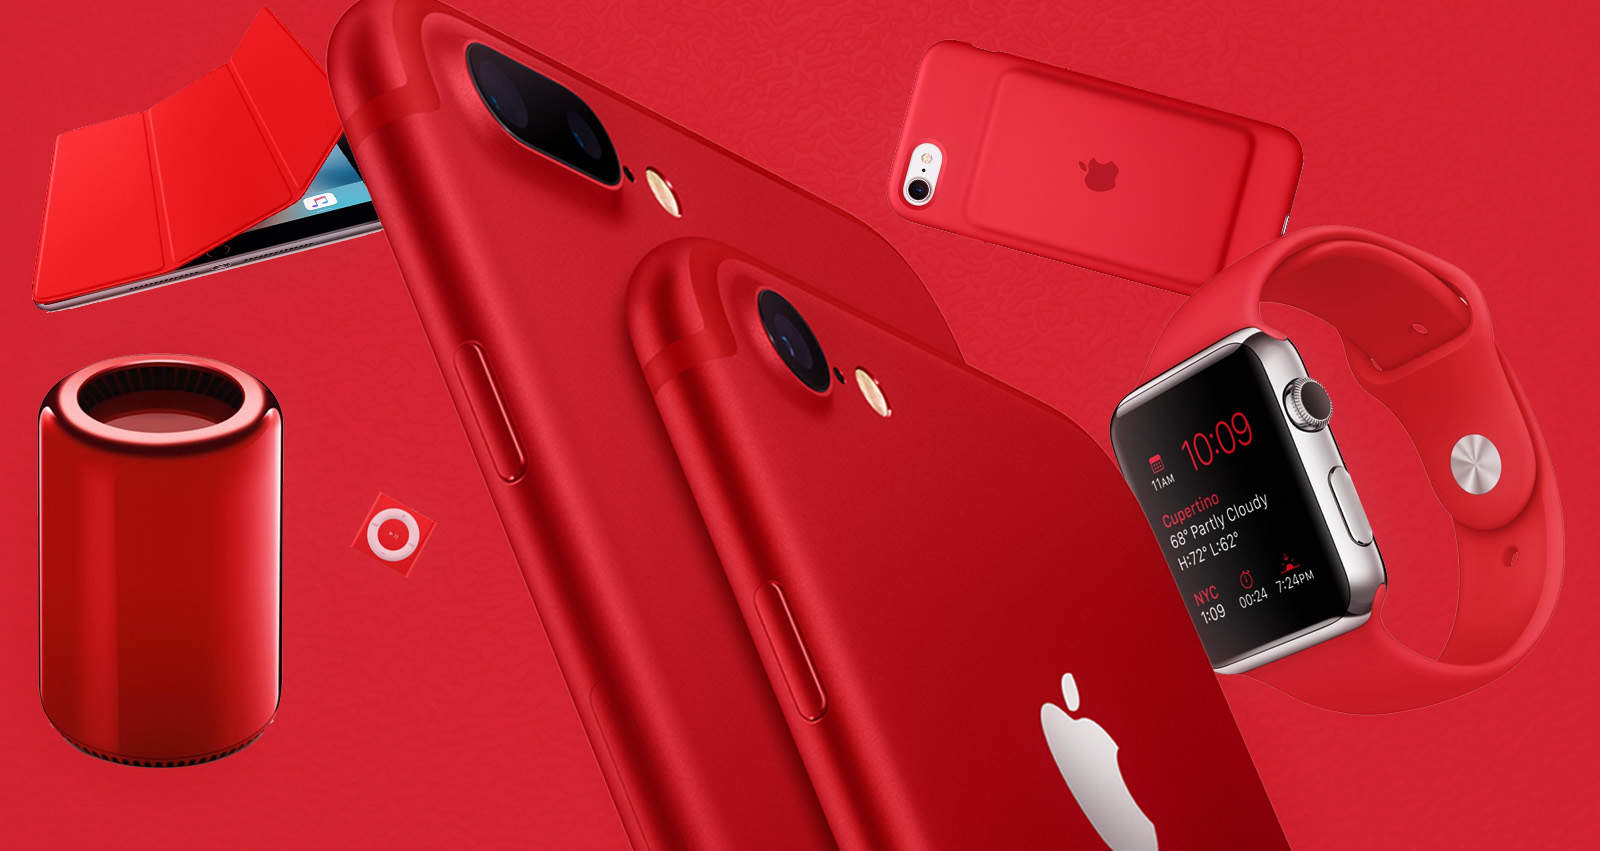 Which Apple PRODUCT(RED) product has us seeing red?